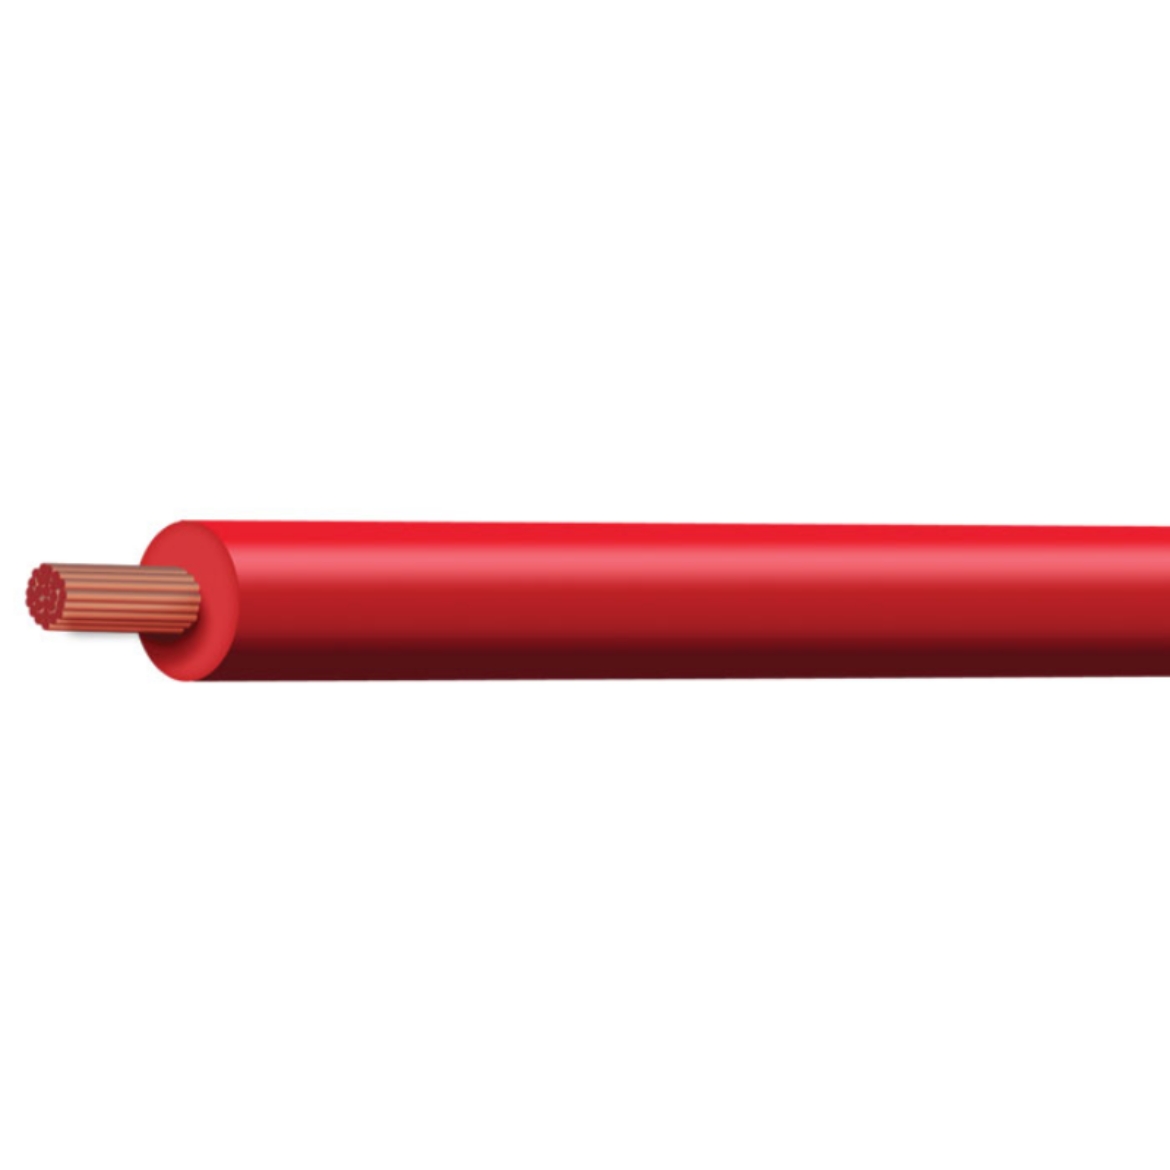 Picture of TYCAB SINGLE CORE CABLE BATTERY 6 B & S CROSS SECT 14MM SQ RATING 125A RED - 30M ROLL